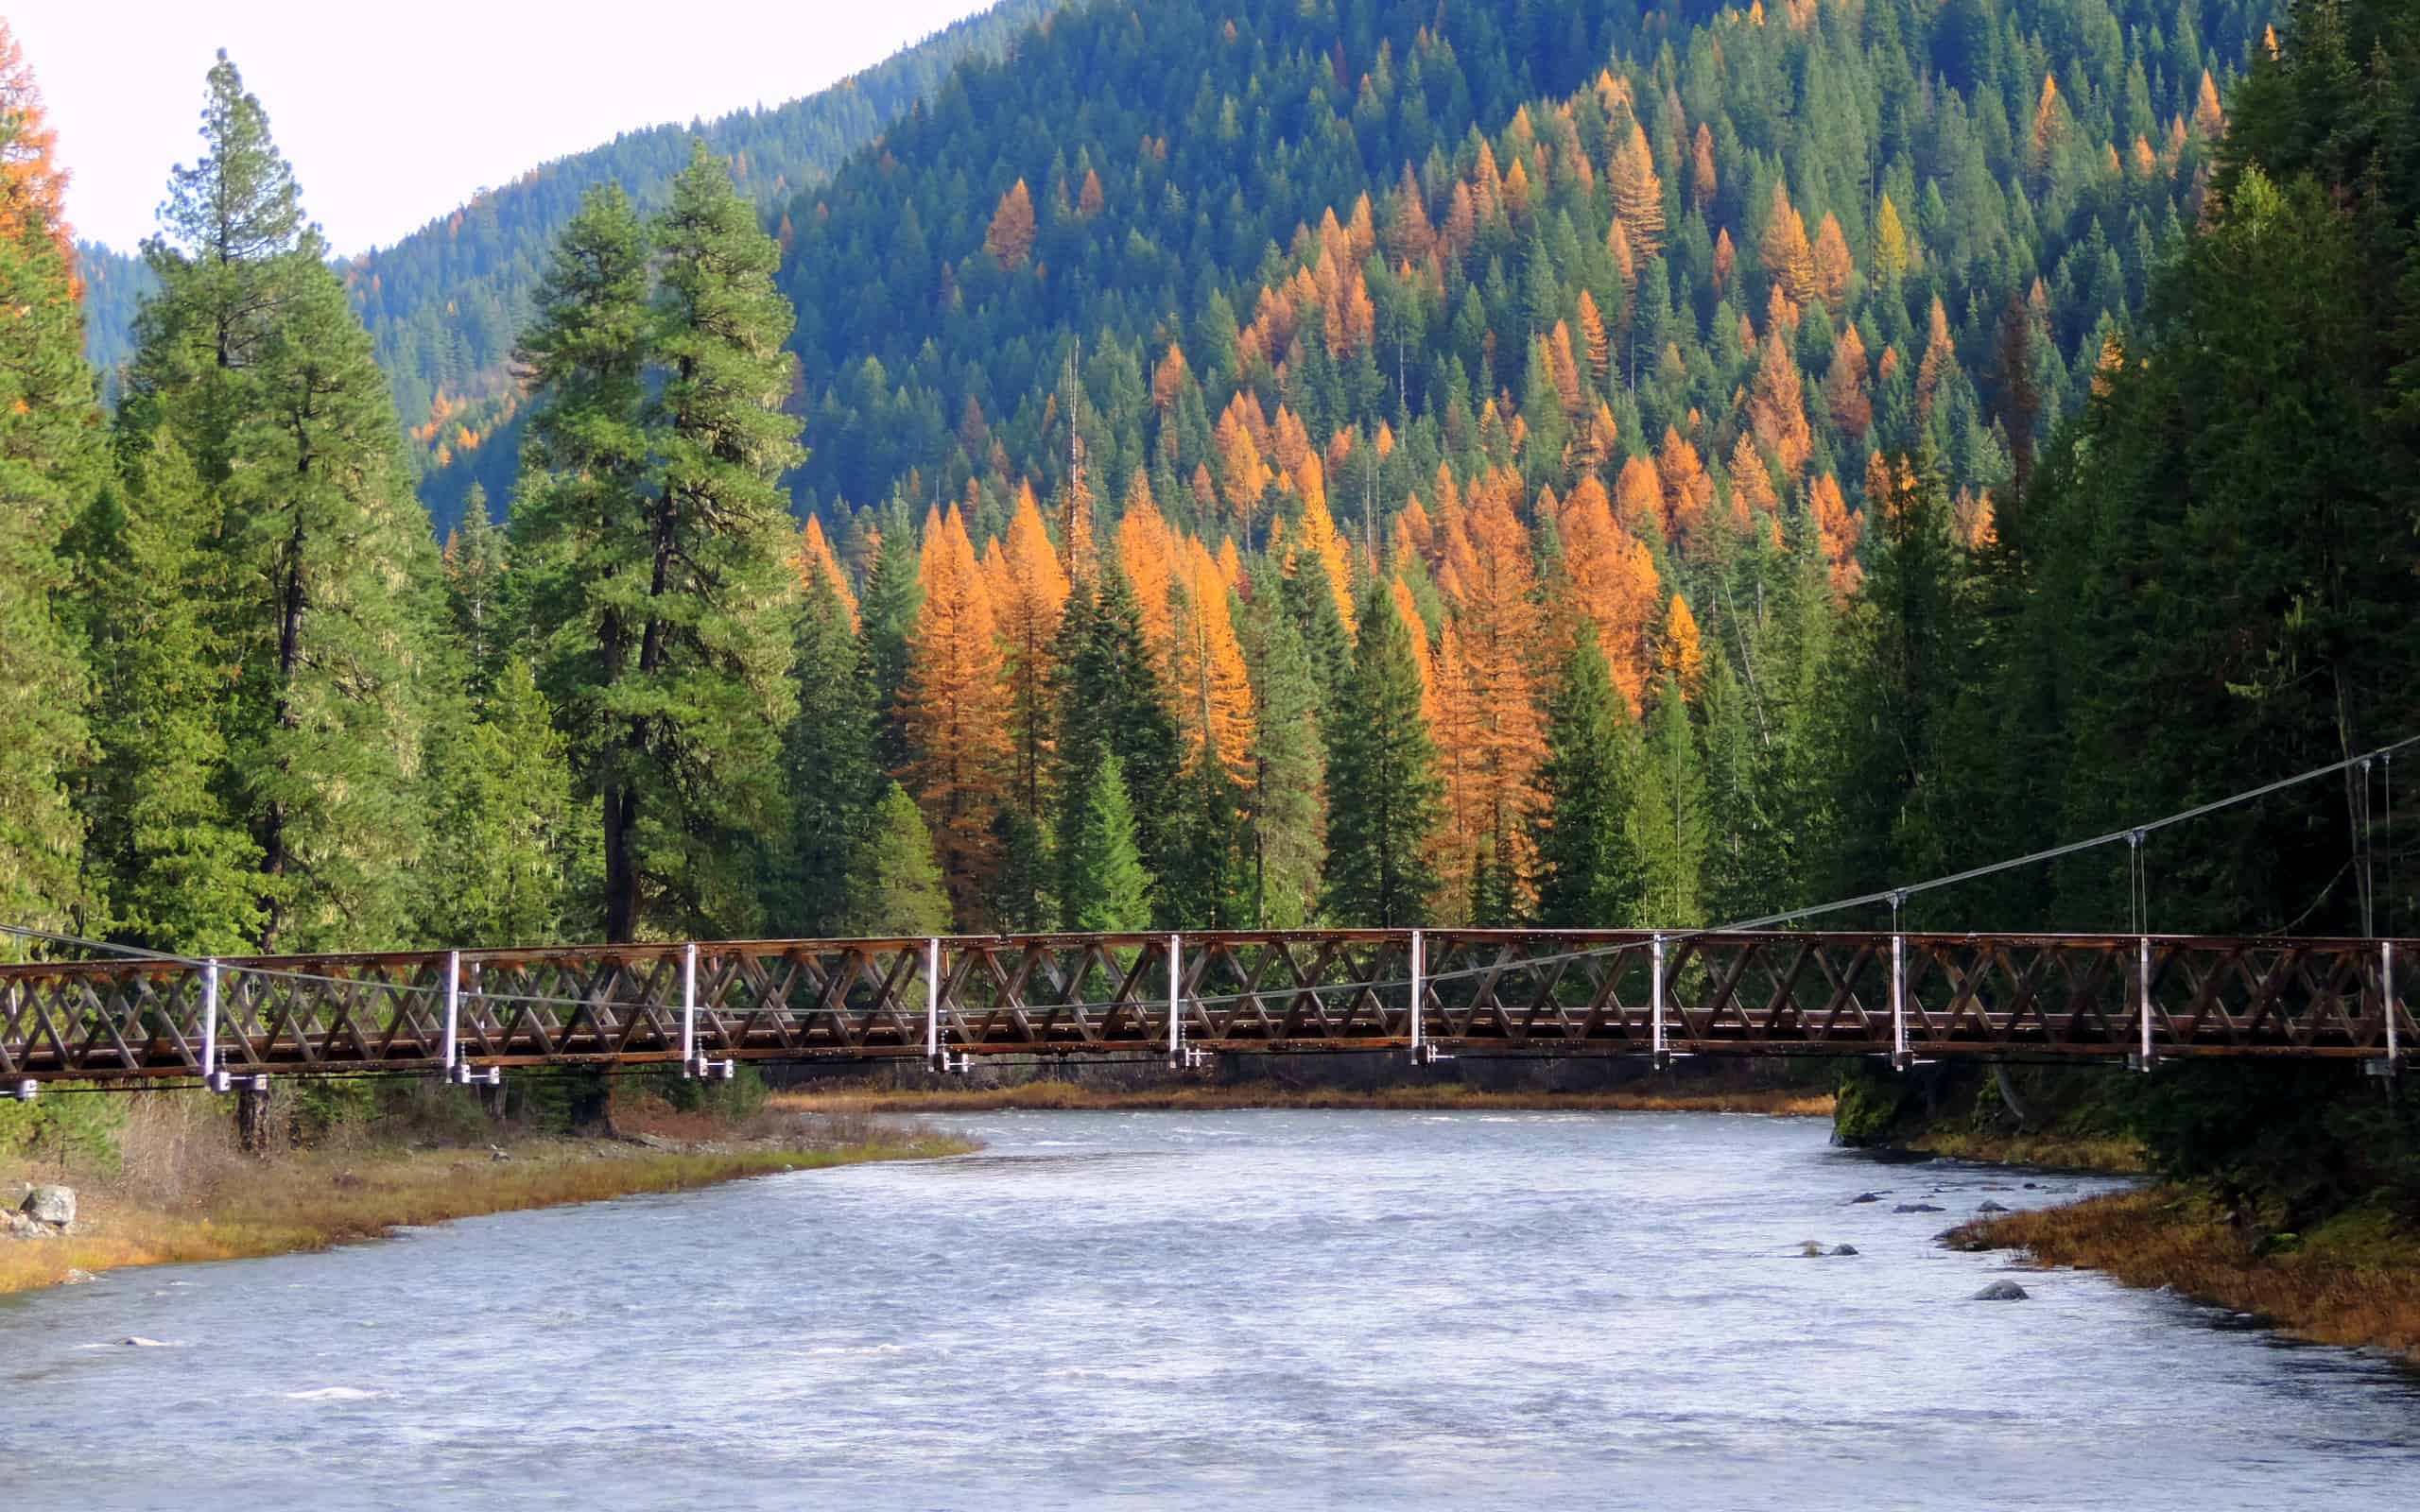 Foot bridge over Lochsa River with Tamaracks in the background